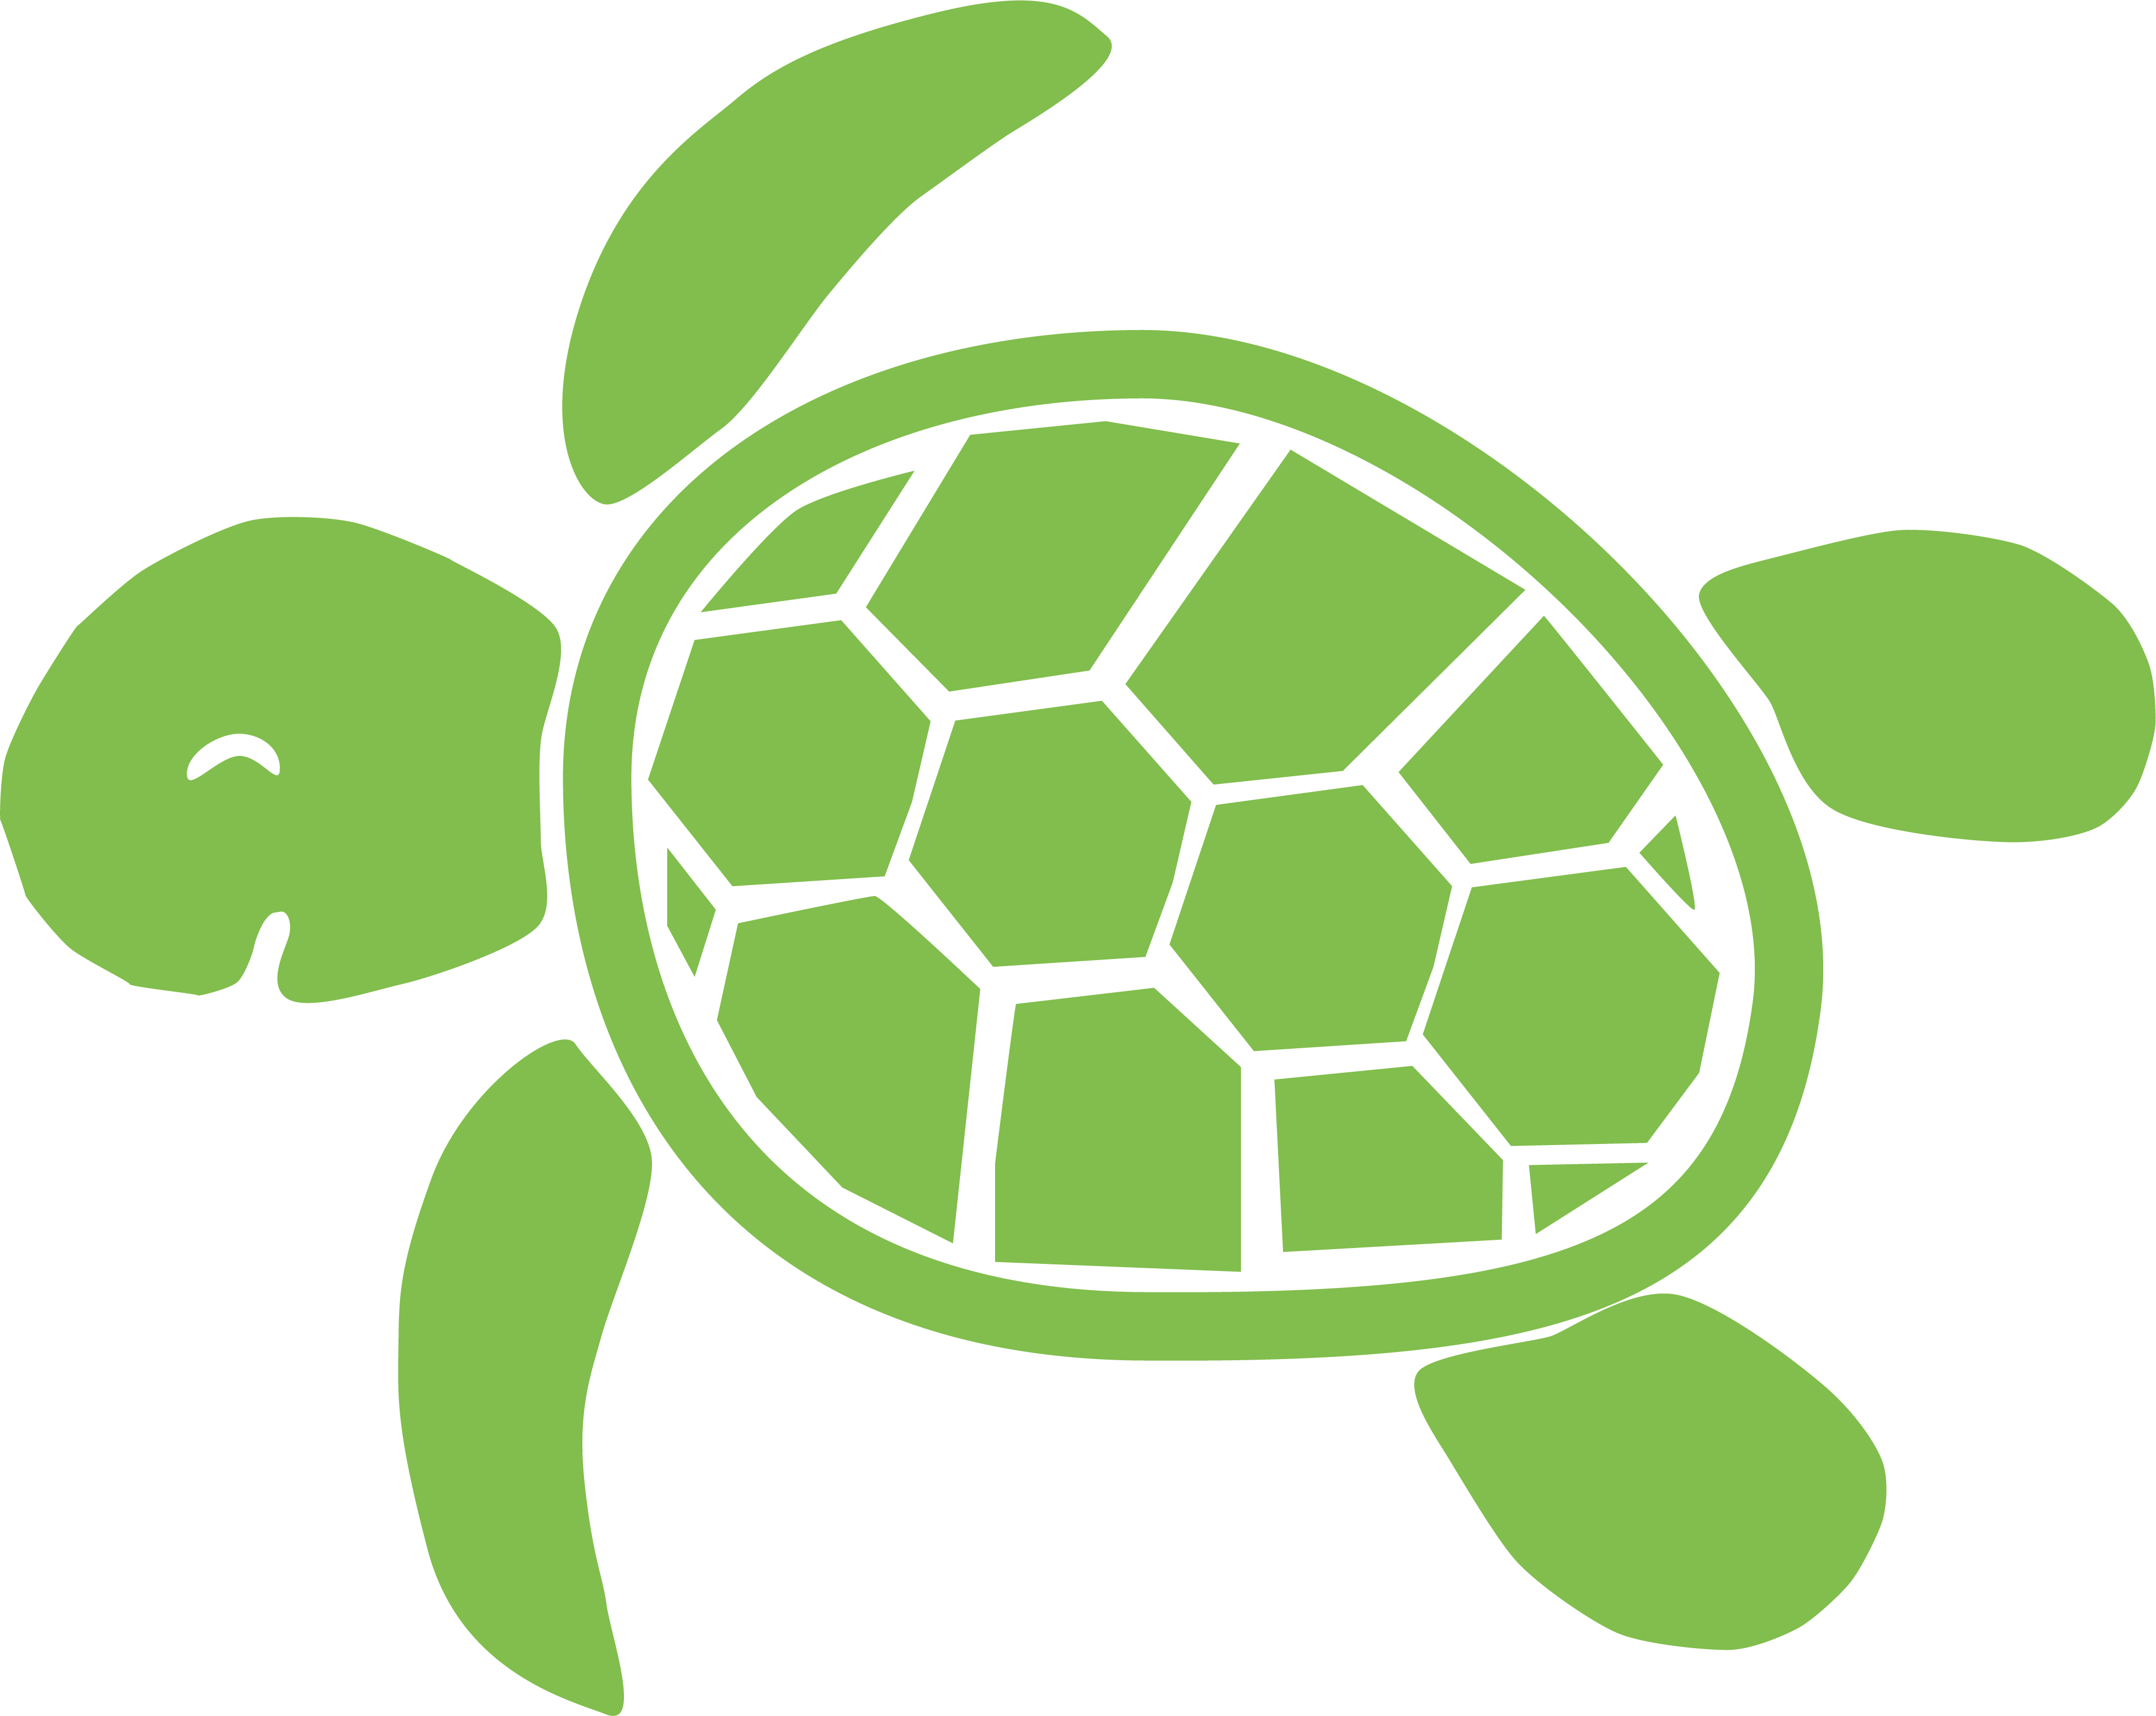 Sea turtle svg clipart images gallery for free download